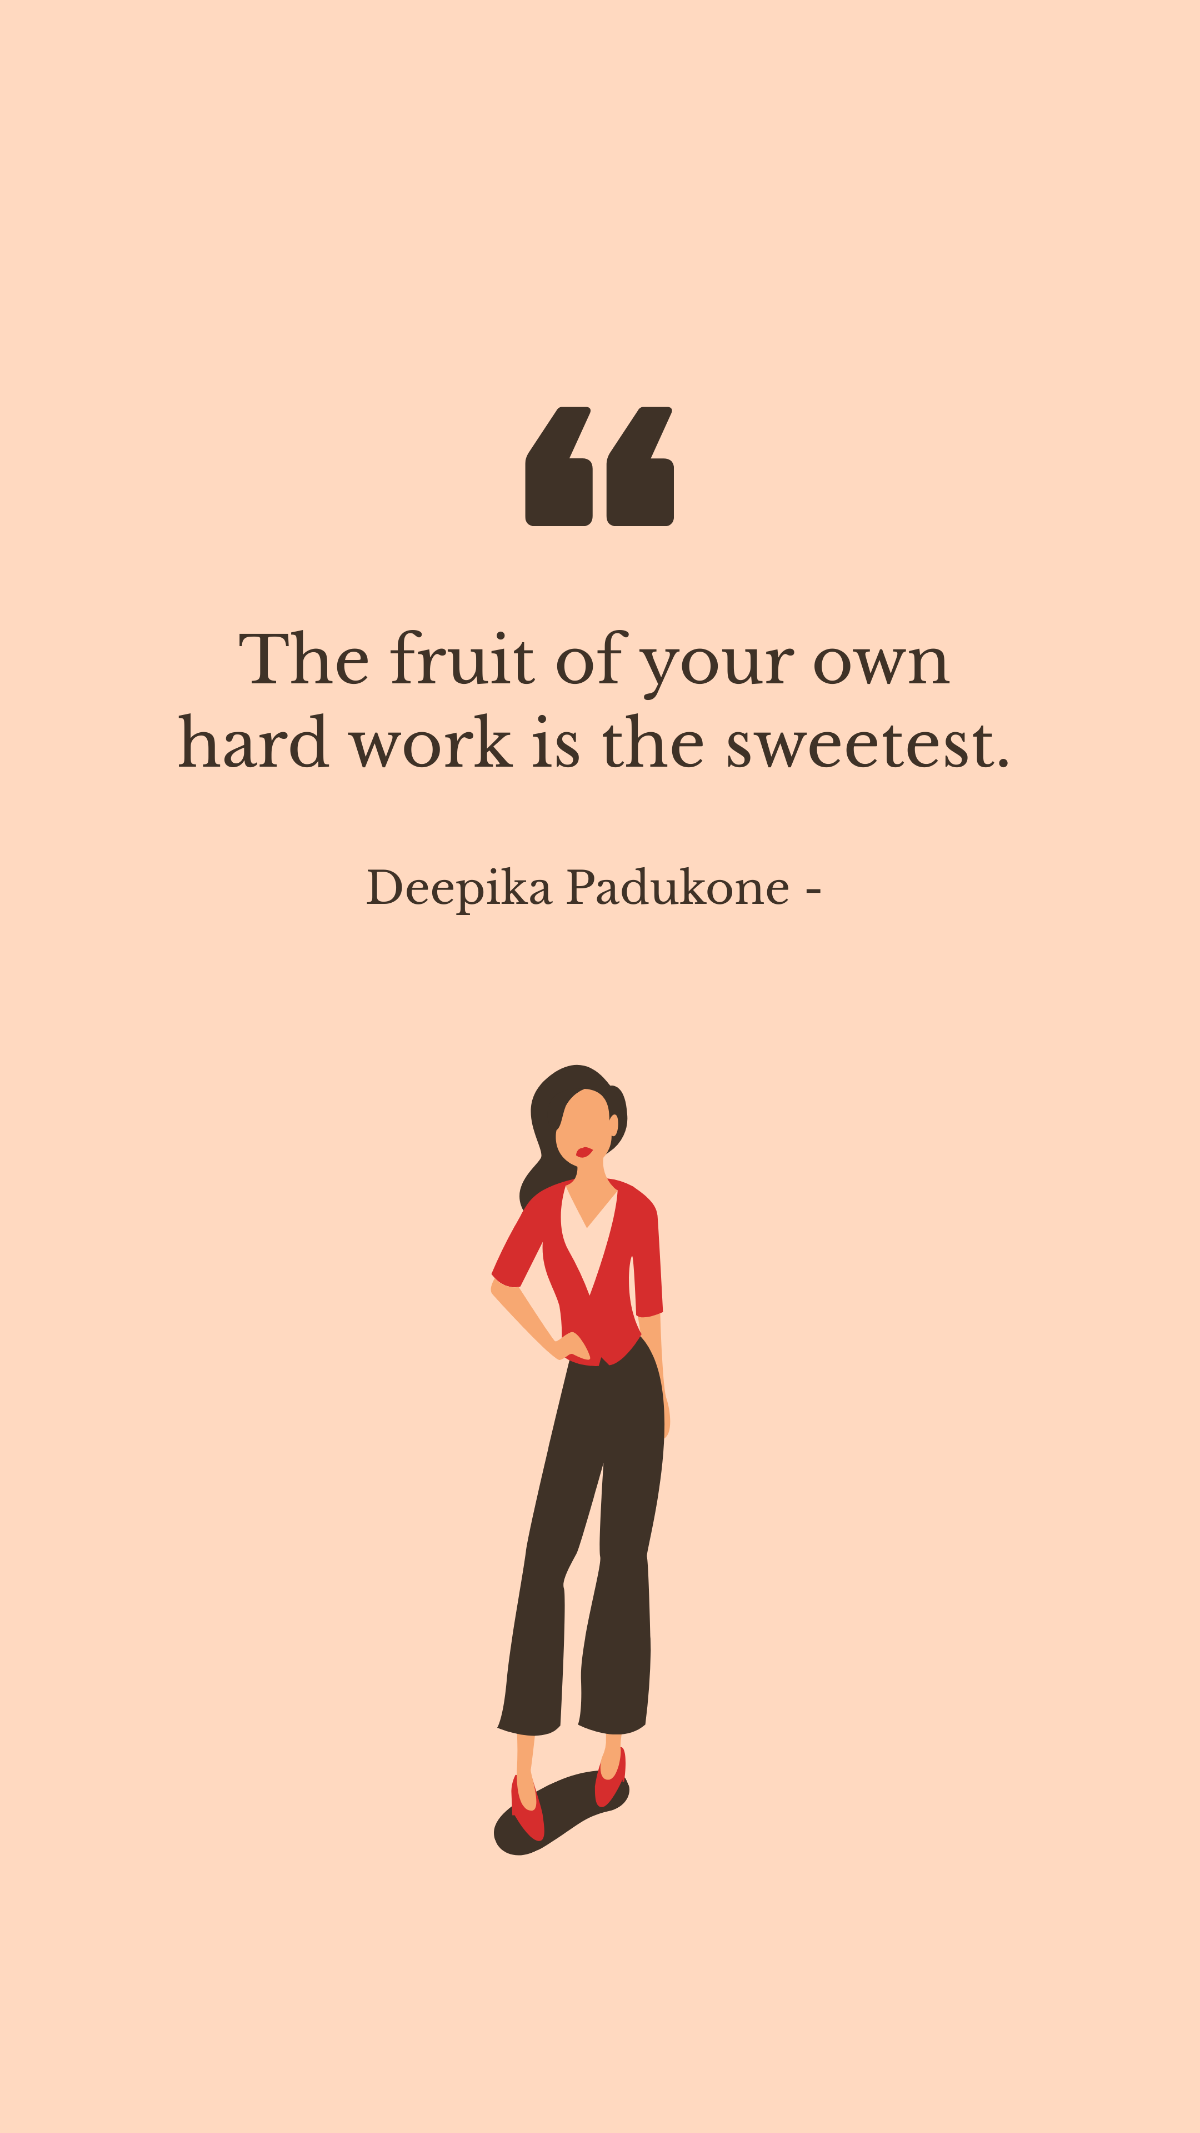 Deepika Padukone - The fruit of your own hard work is the sweetest. Template